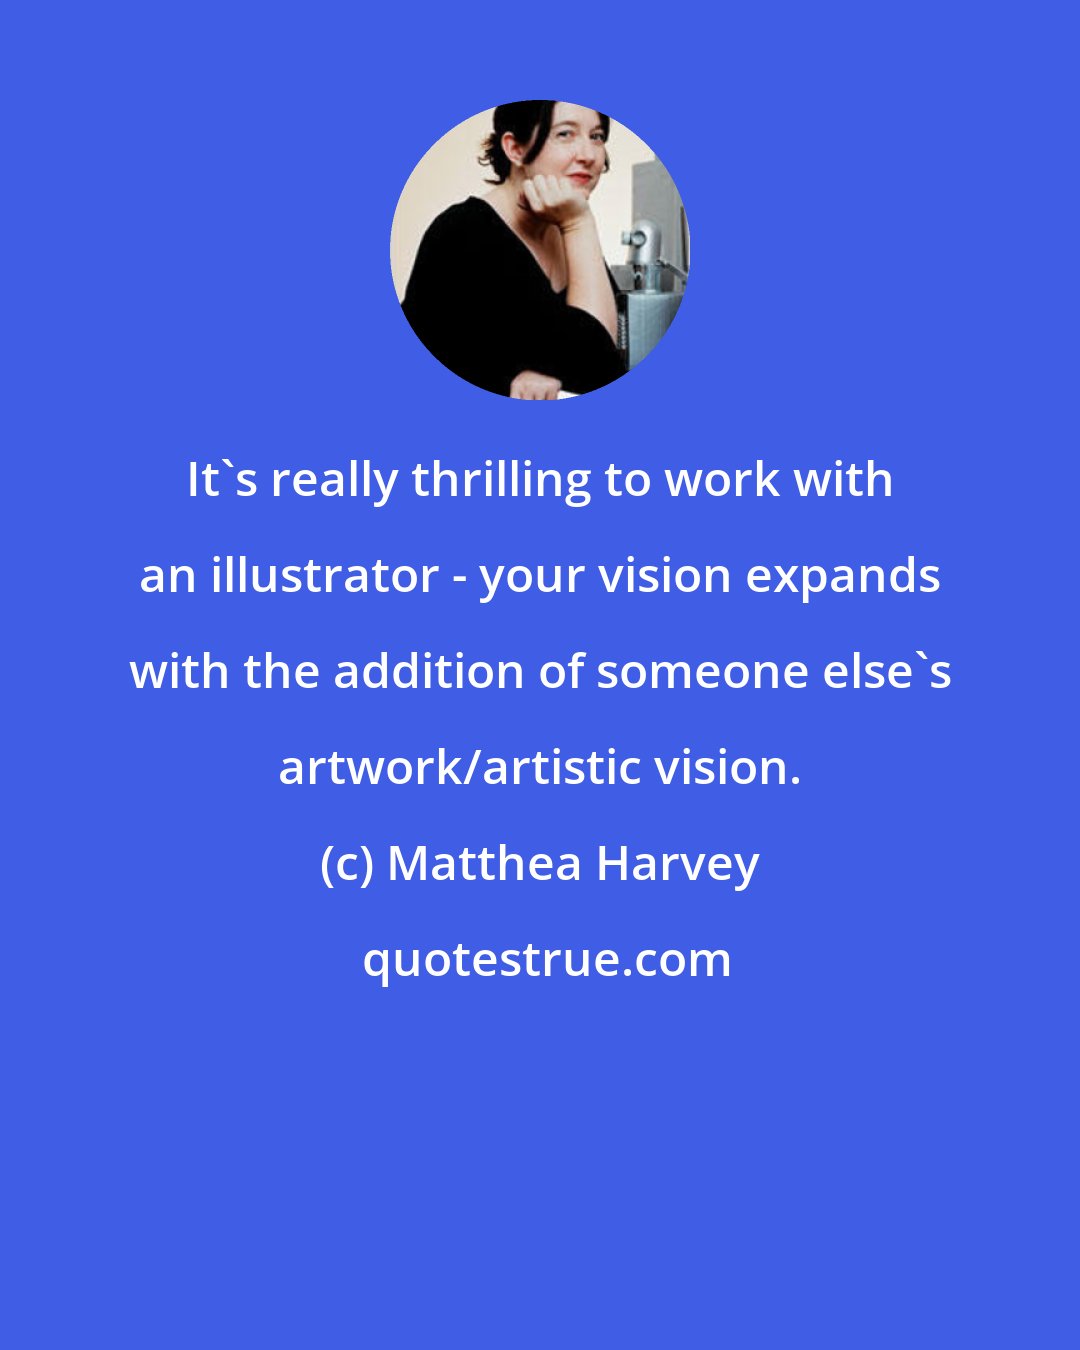 Matthea Harvey: It's really thrilling to work with an illustrator - your vision expands with the addition of someone else's artwork/artistic vision.